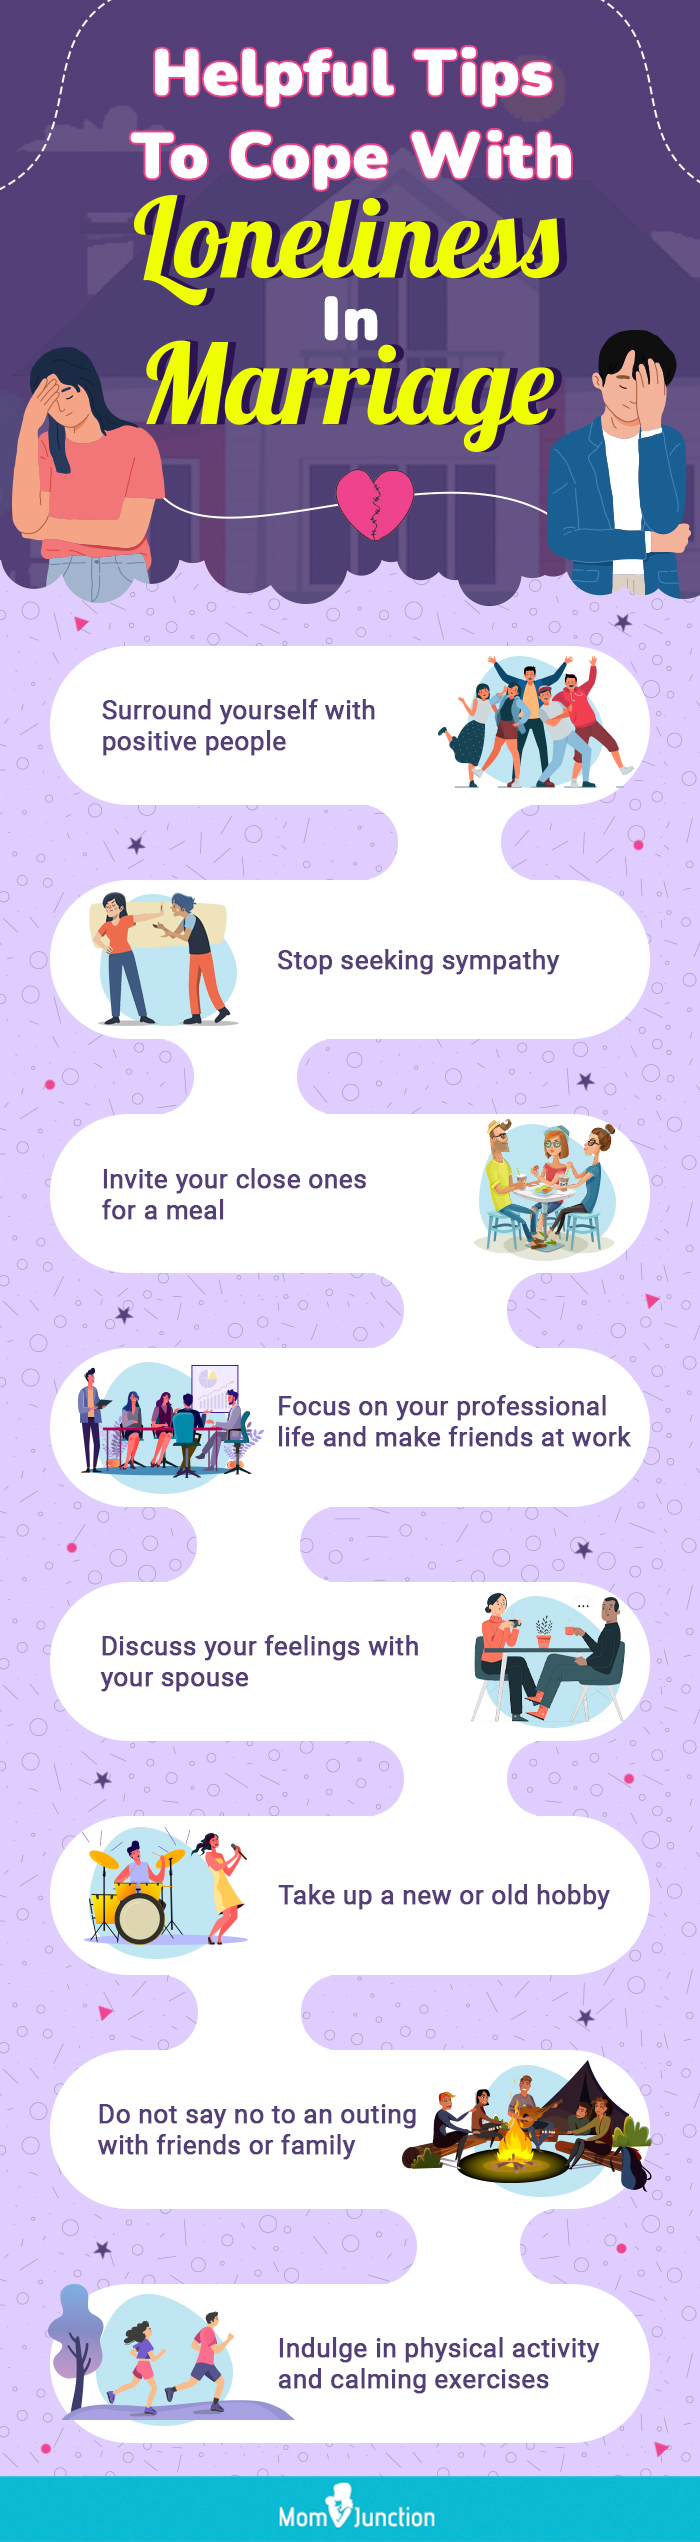 helpful tips to cope with loneliness in marriage [infographic]